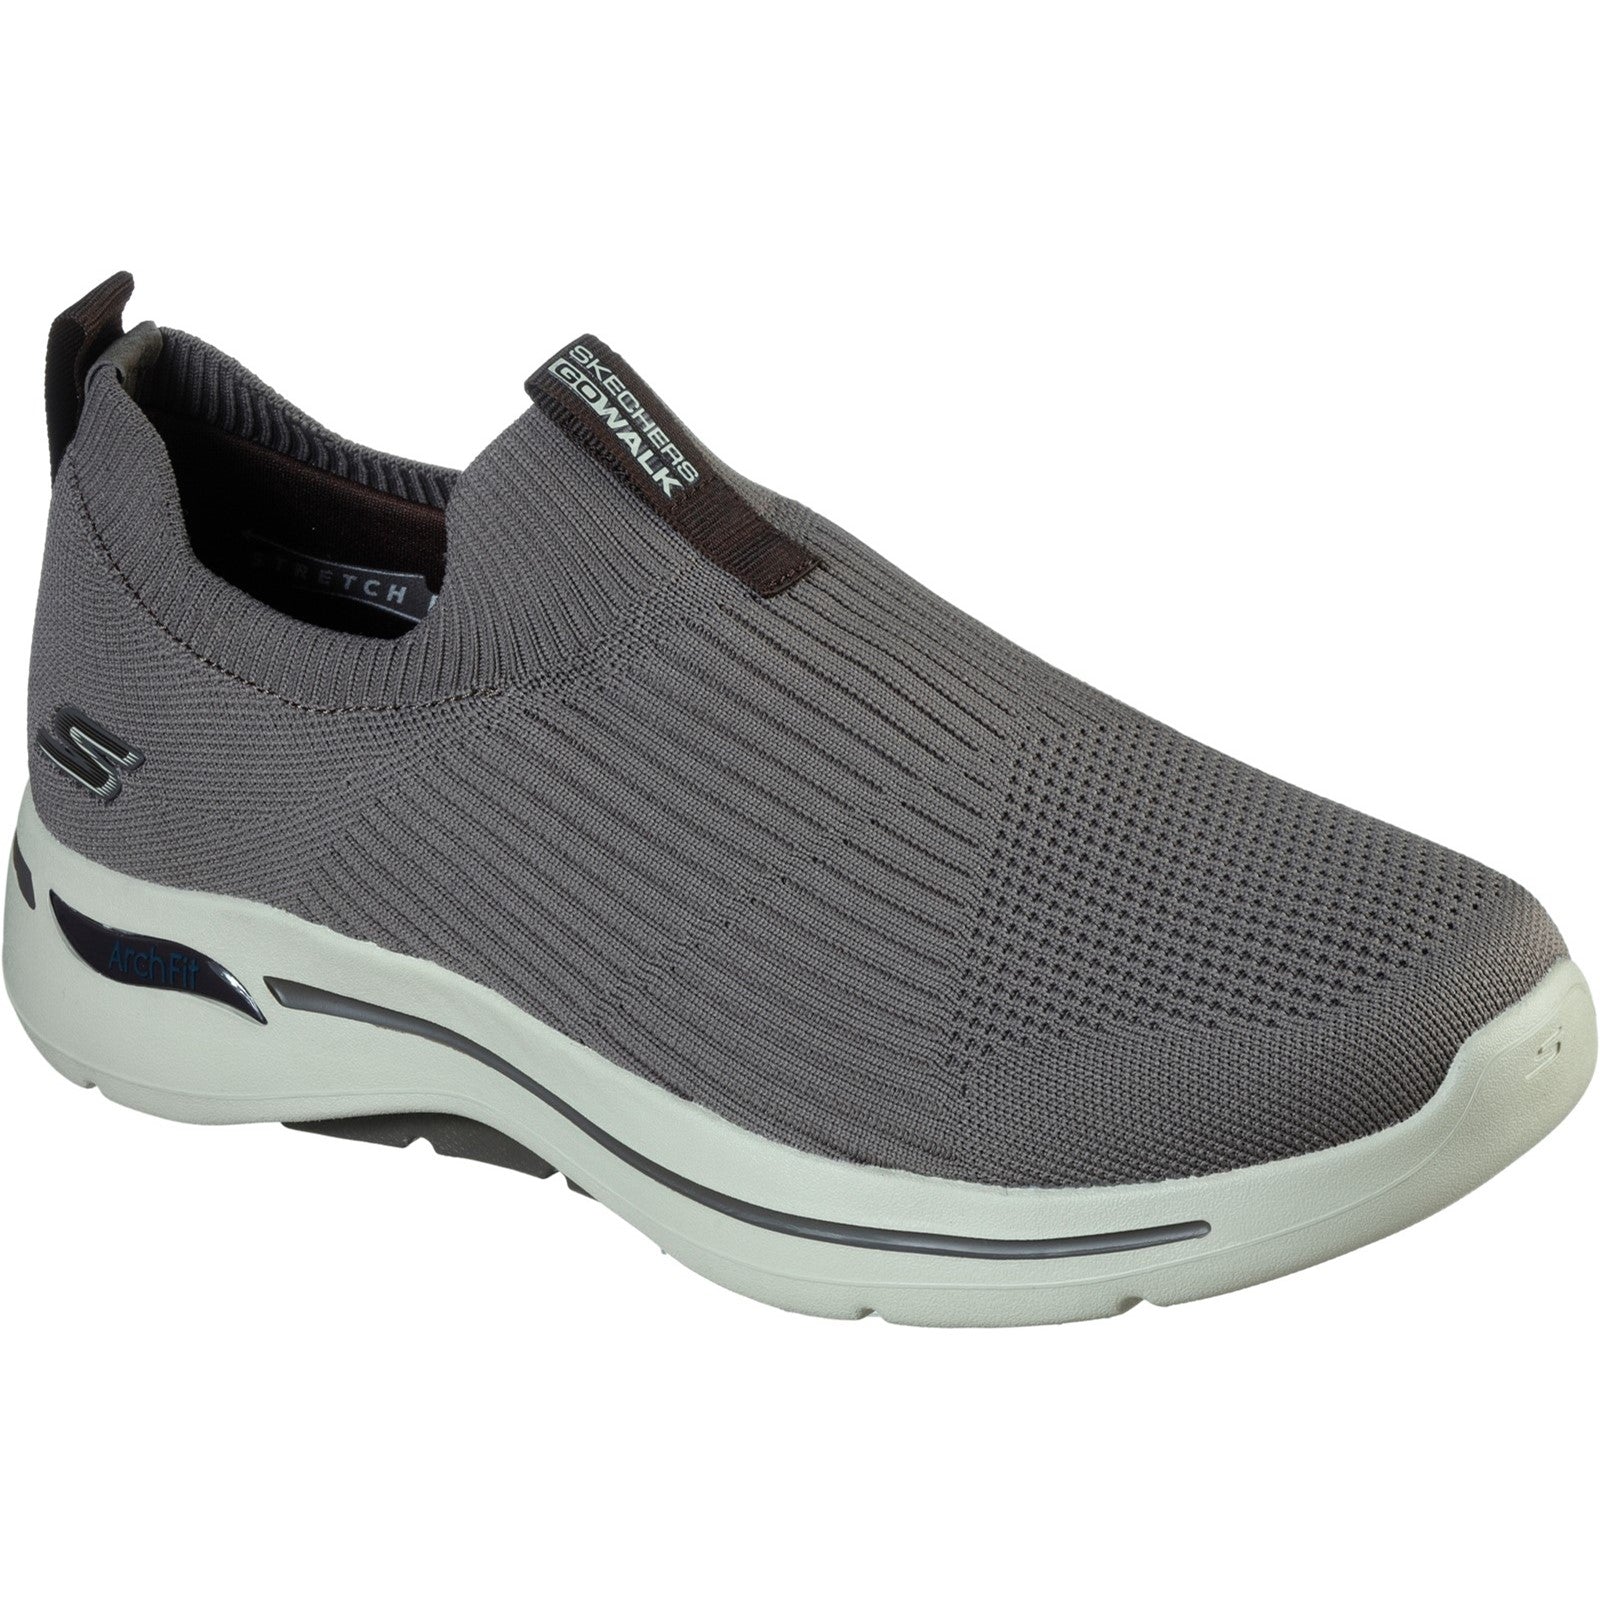 Skechers Go Walk Arch Fit Iconic Slip On Trainers